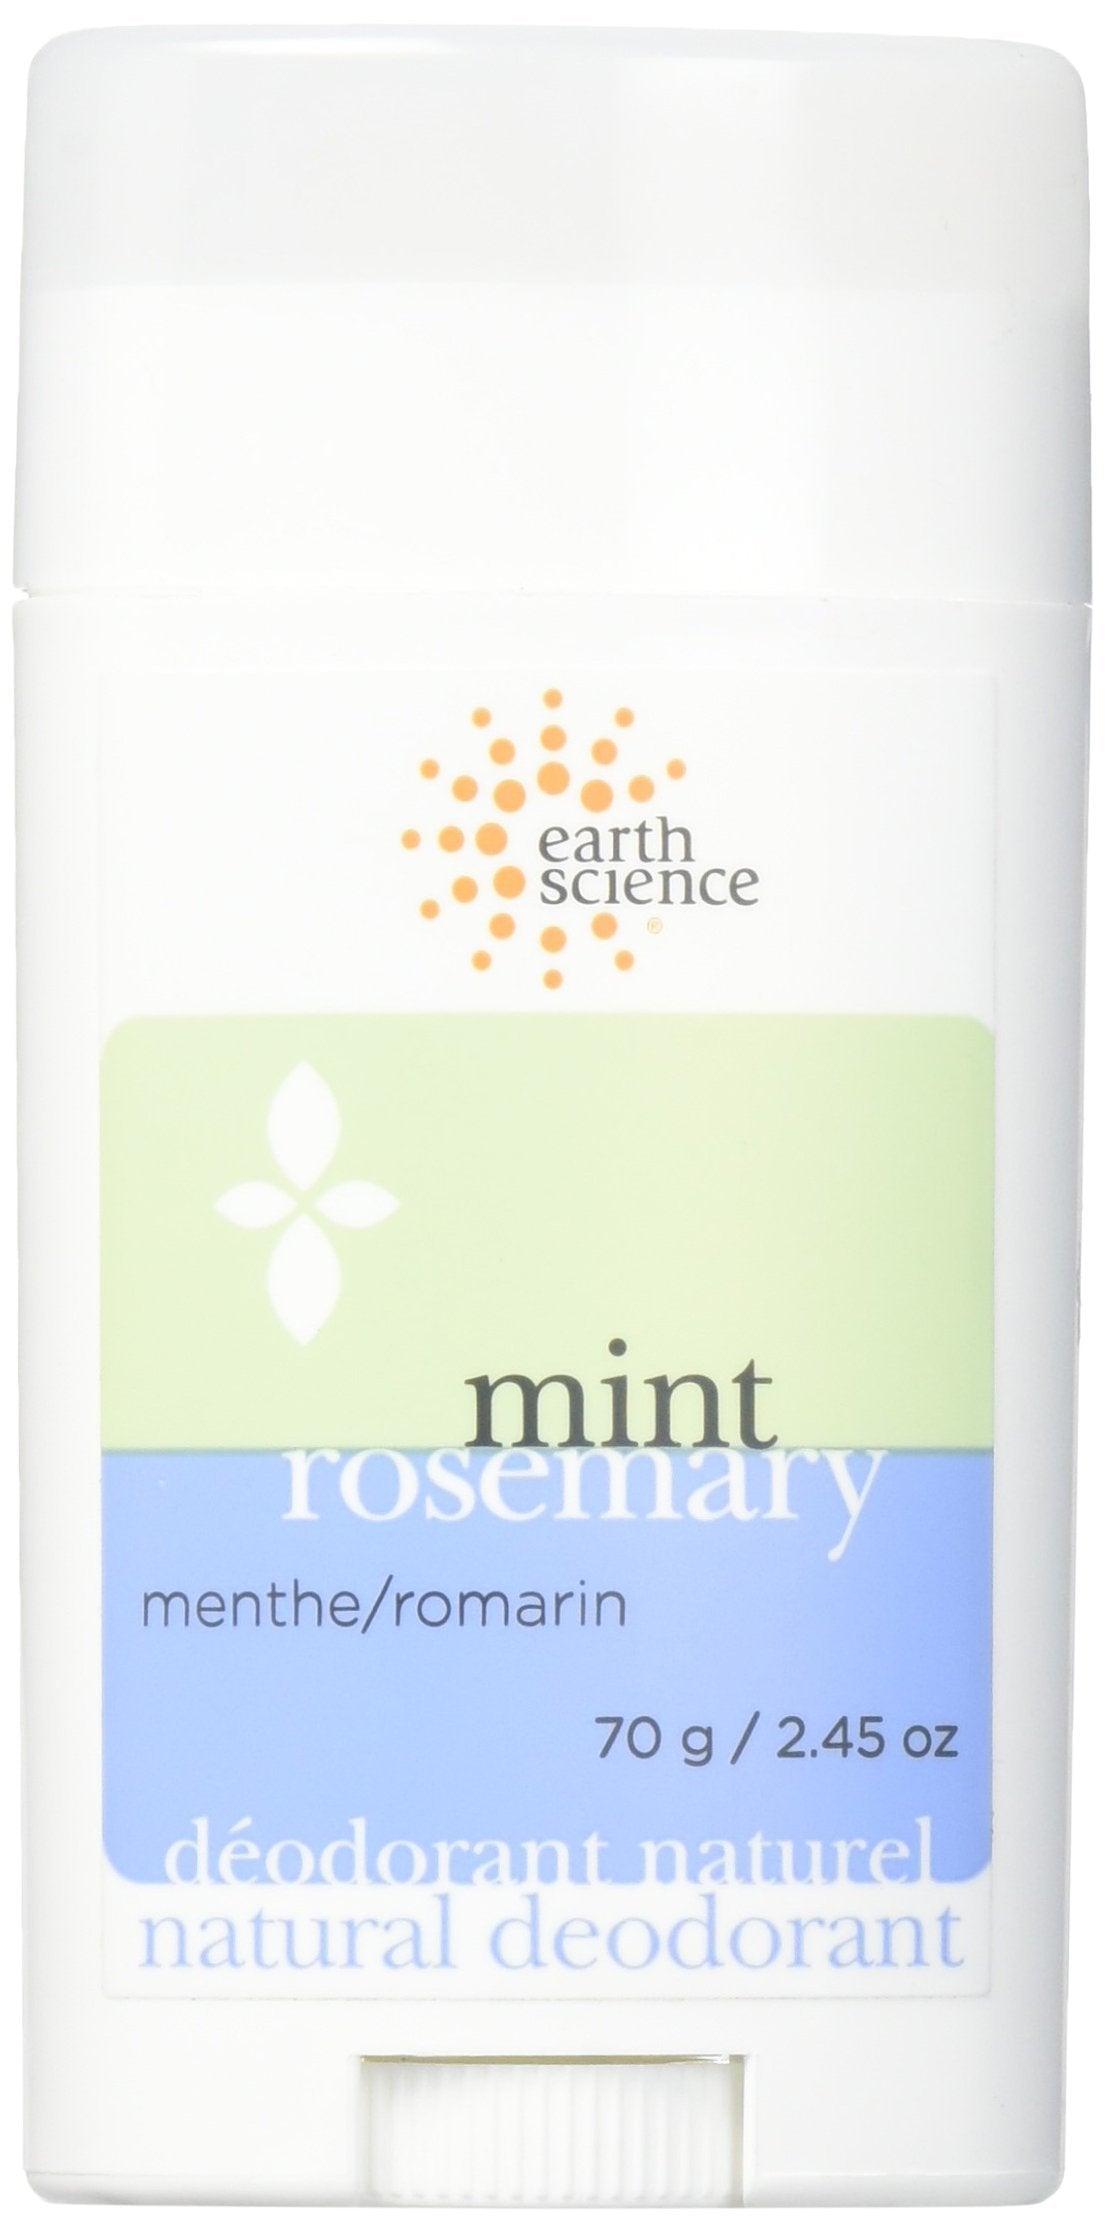 Earth Science - Natural Rosemary Mint Fragrance Deodorant, 70g - Natural Roll On Deodorant Aluminum-Free, Paraben-Free, Cruelty-Free and Alcohol-Free Deodorant - Travel Size Underarm Deodorant